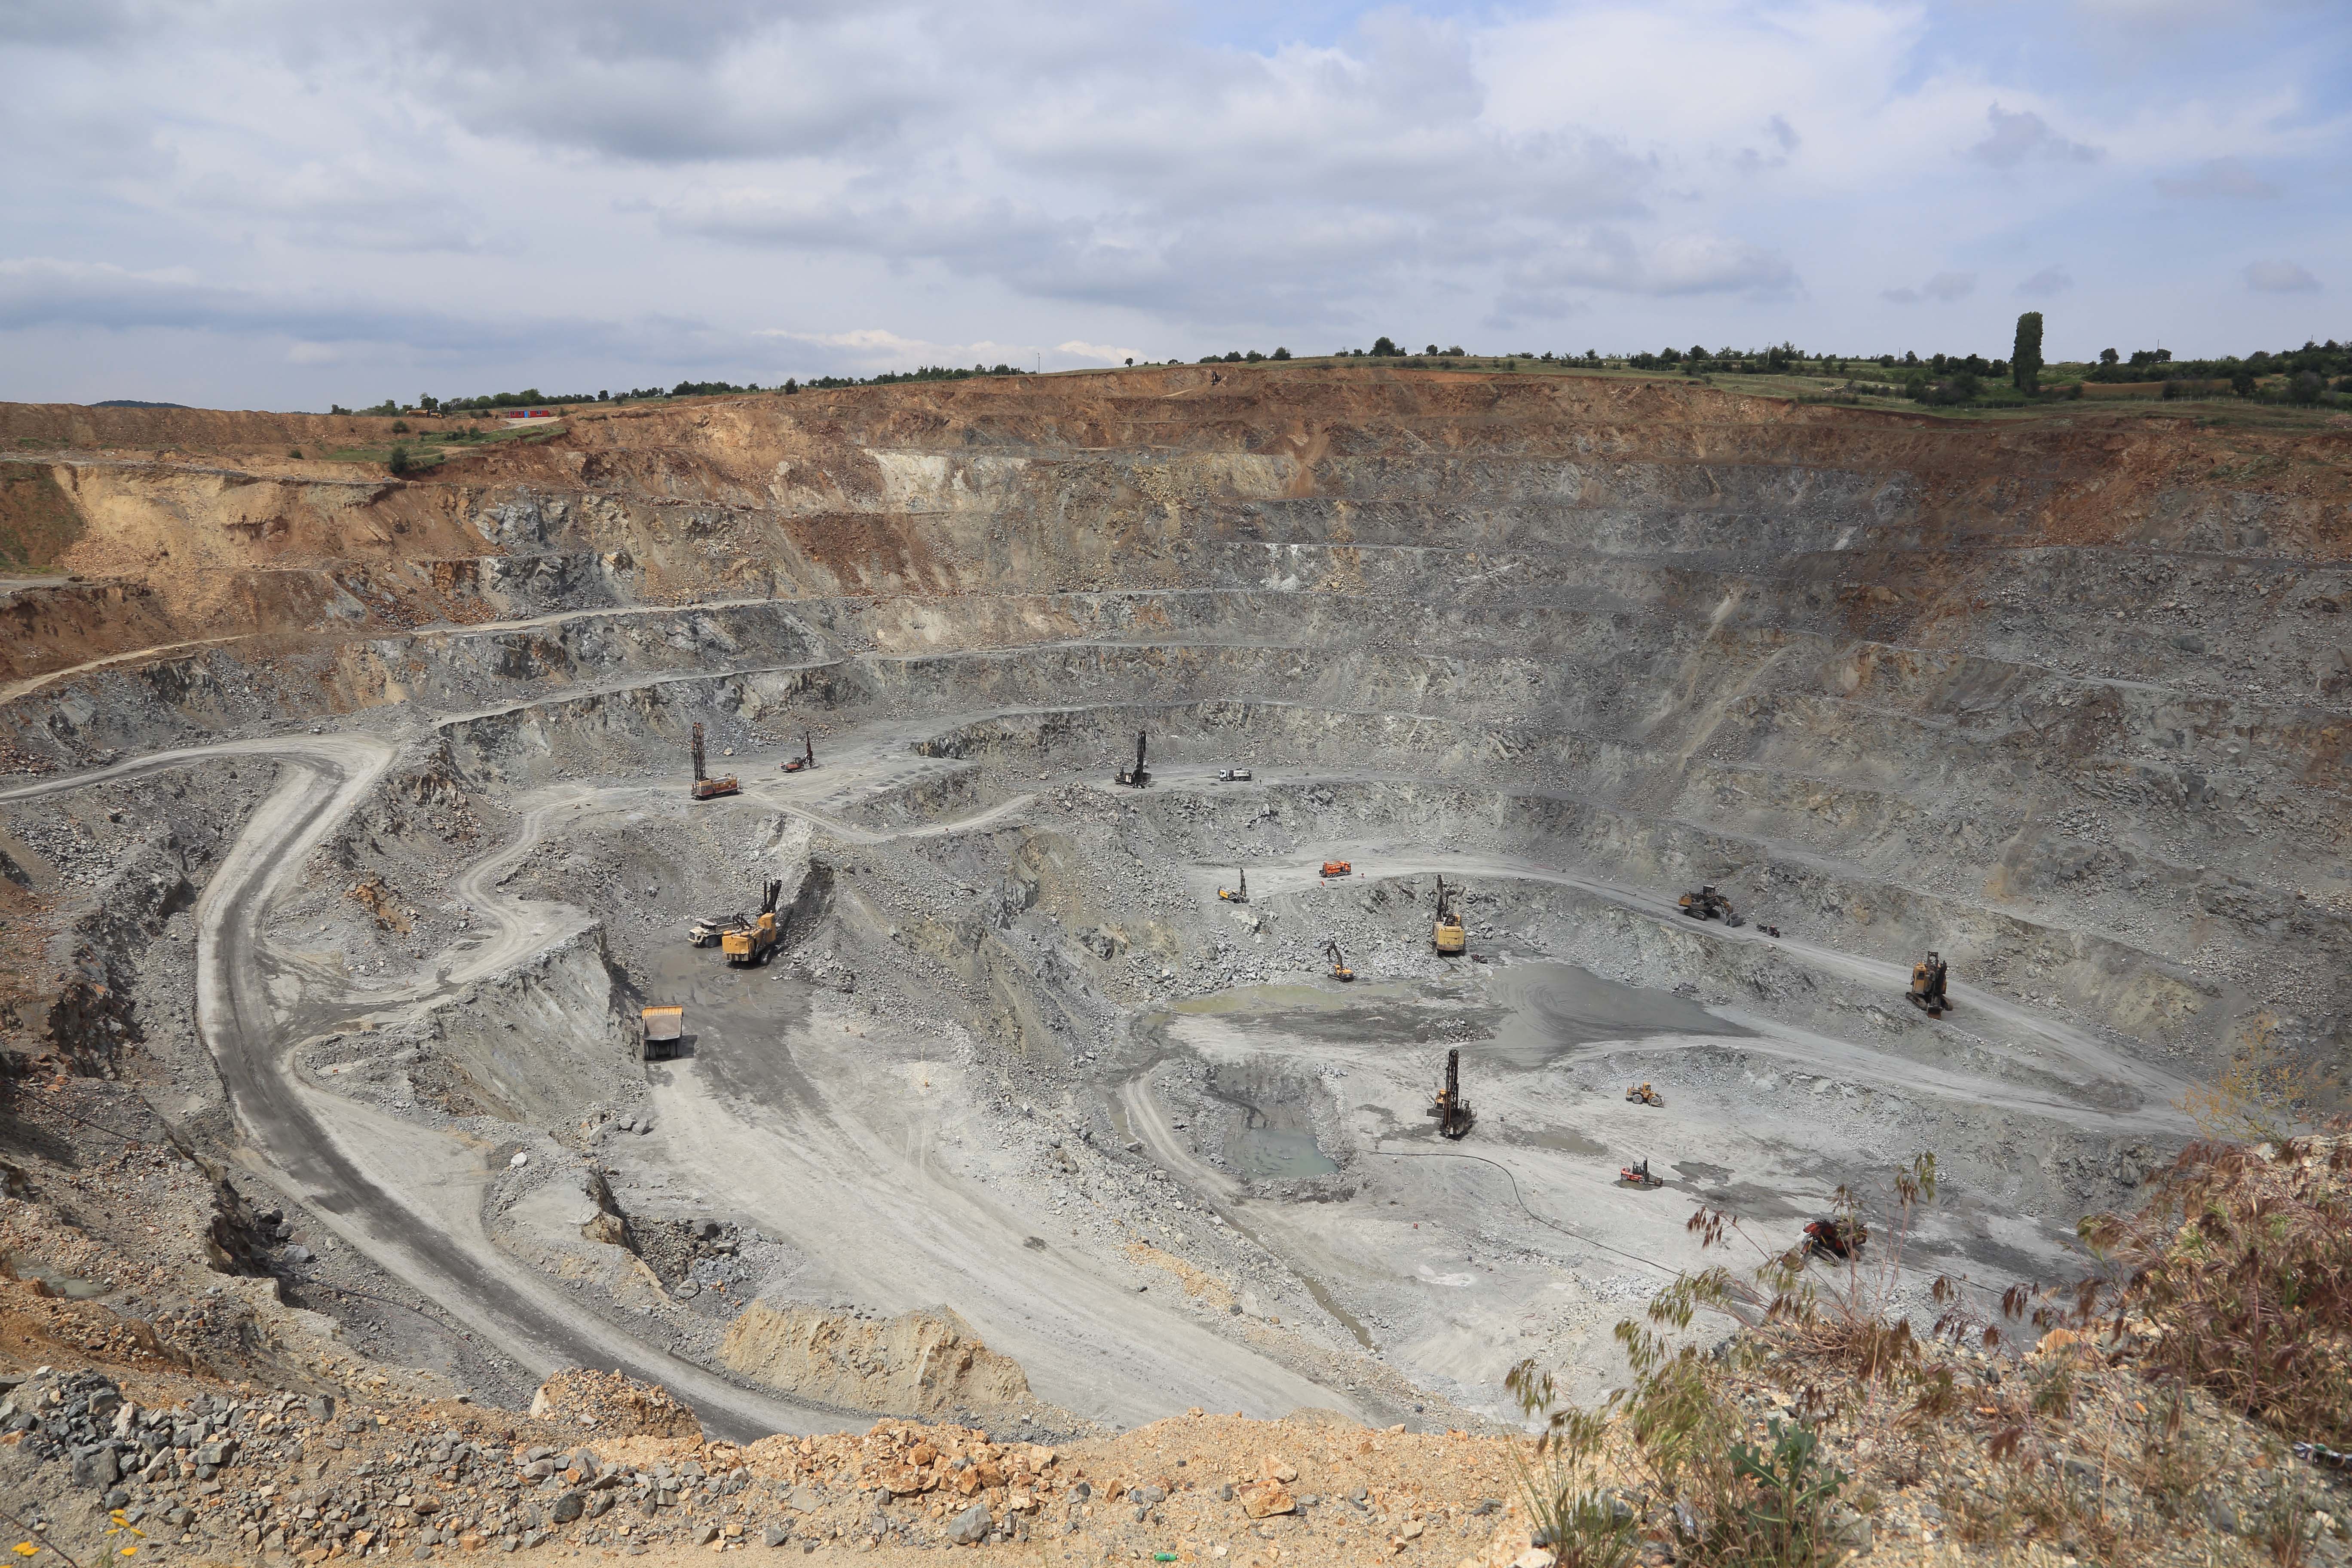 View at the Bucim open-pit copper mine in Macedonia